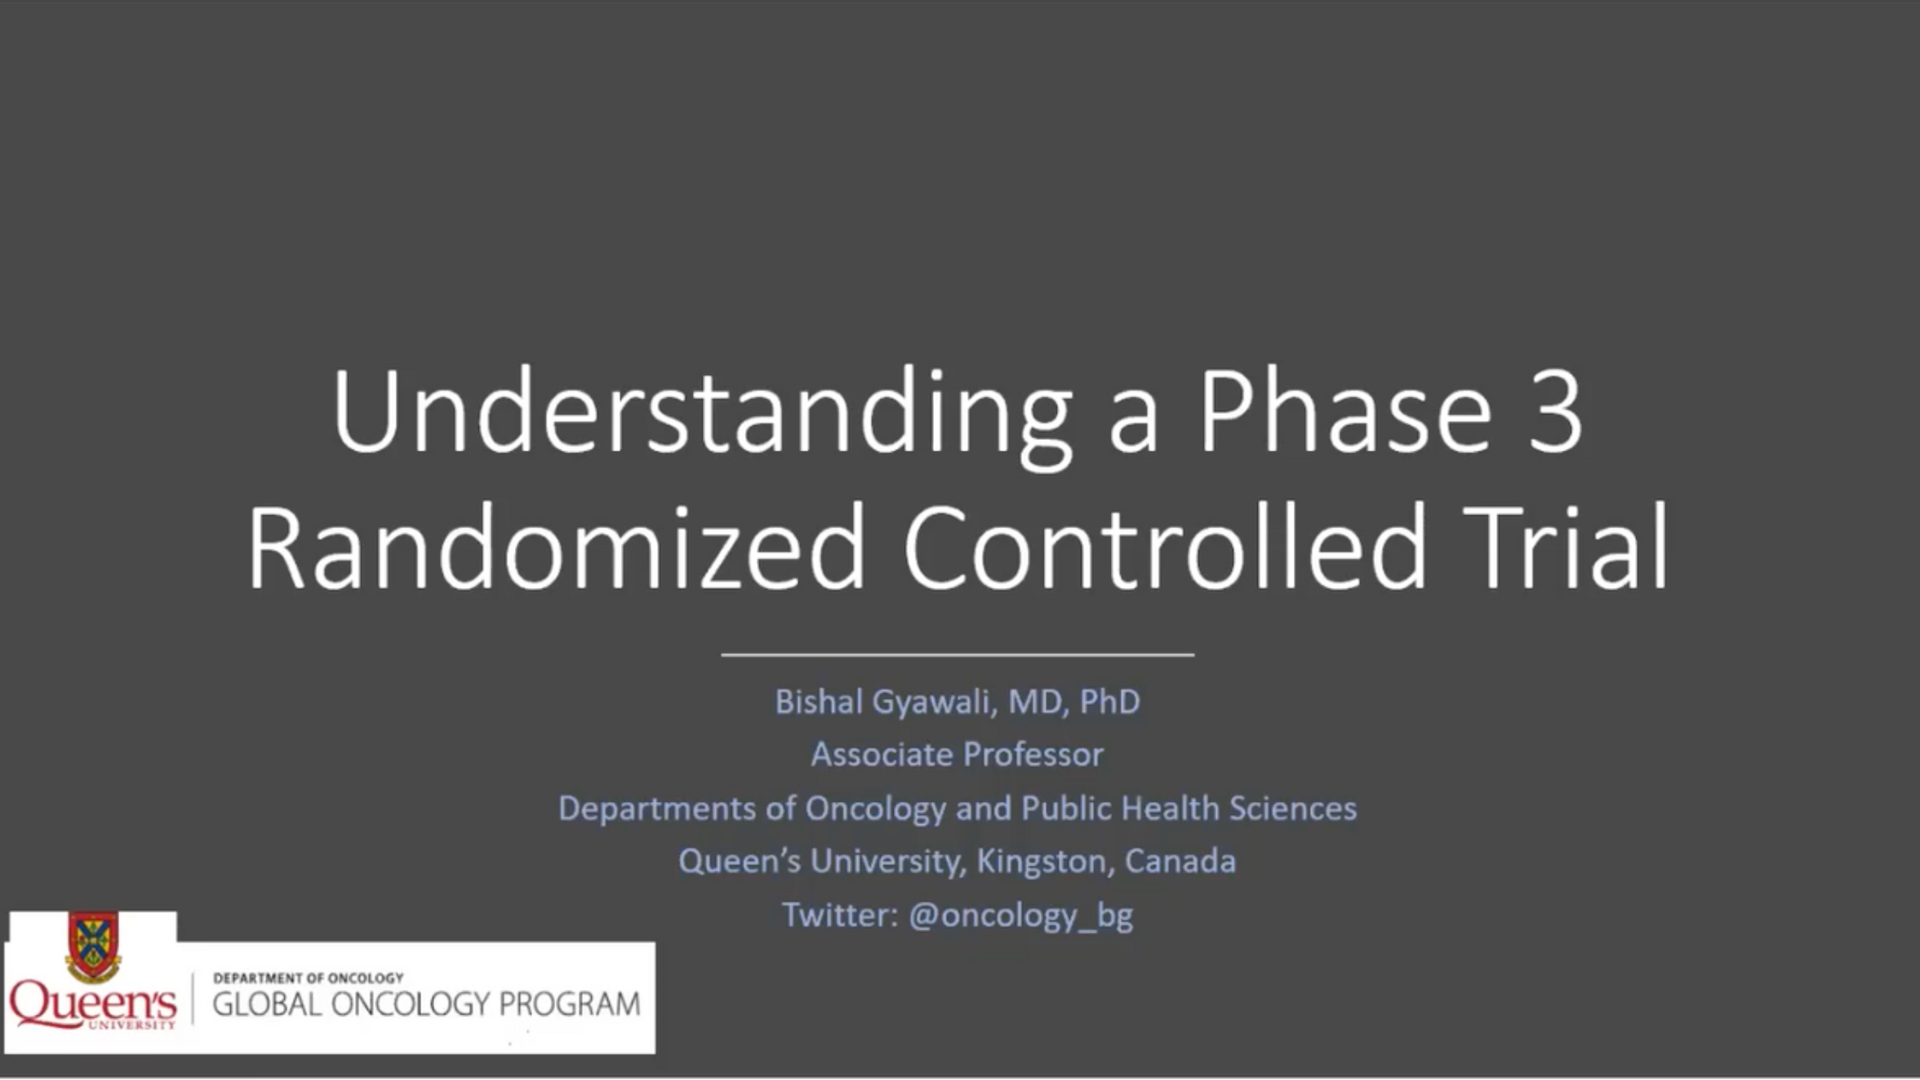 Understanding a Phase 3 Randomized Controlled Trial